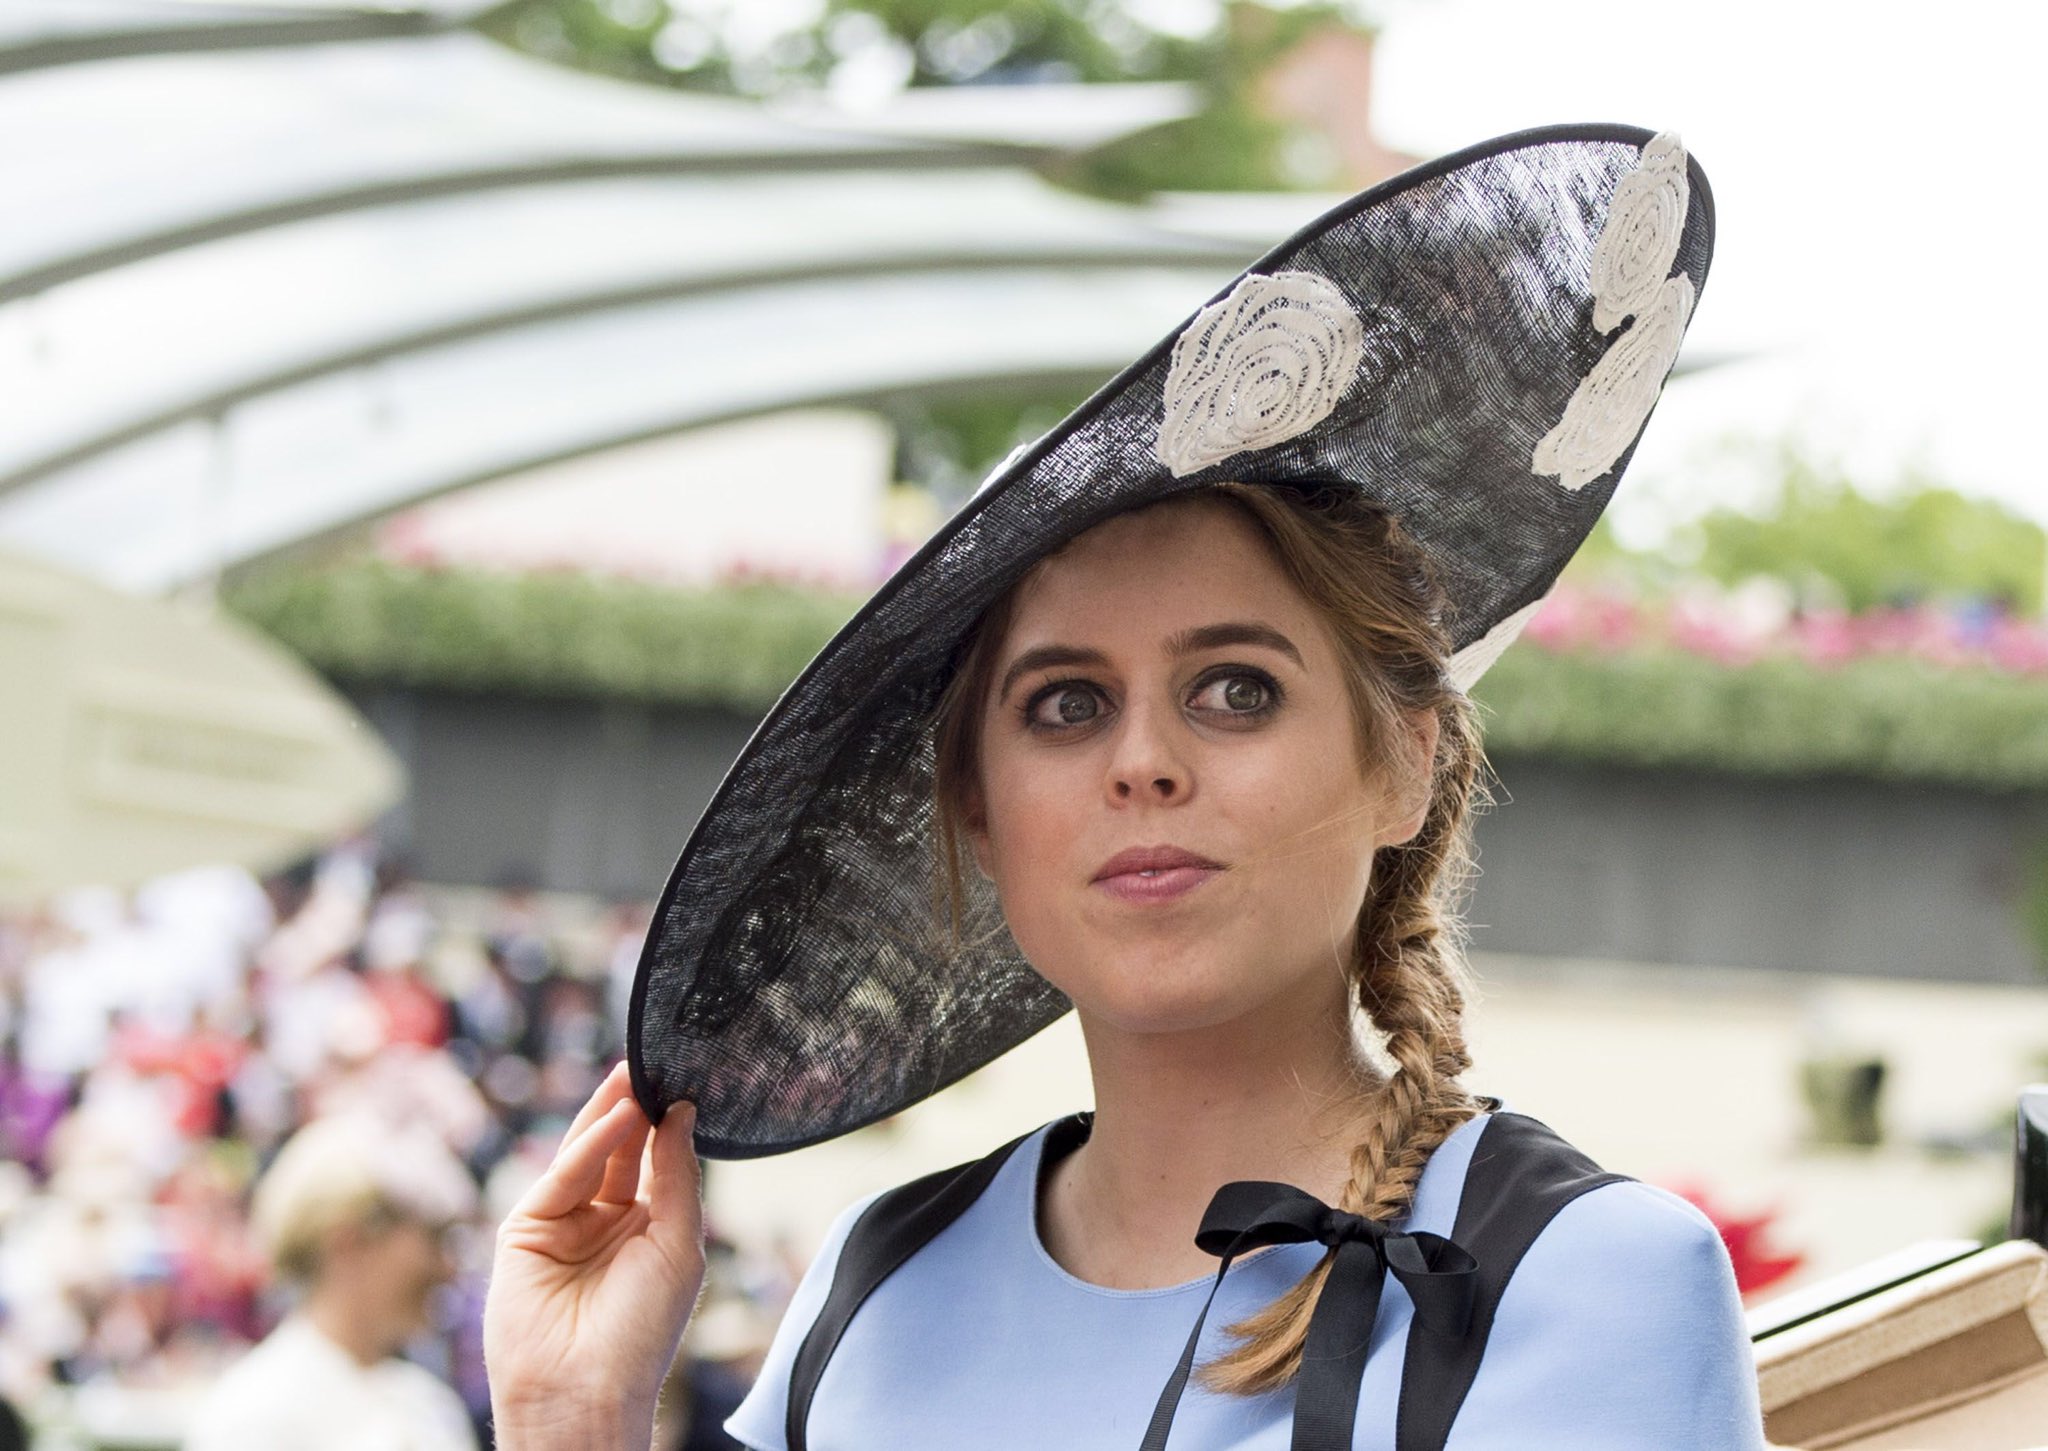 Happy birthday to the most gorgeous HRH, princess Beatrice! 